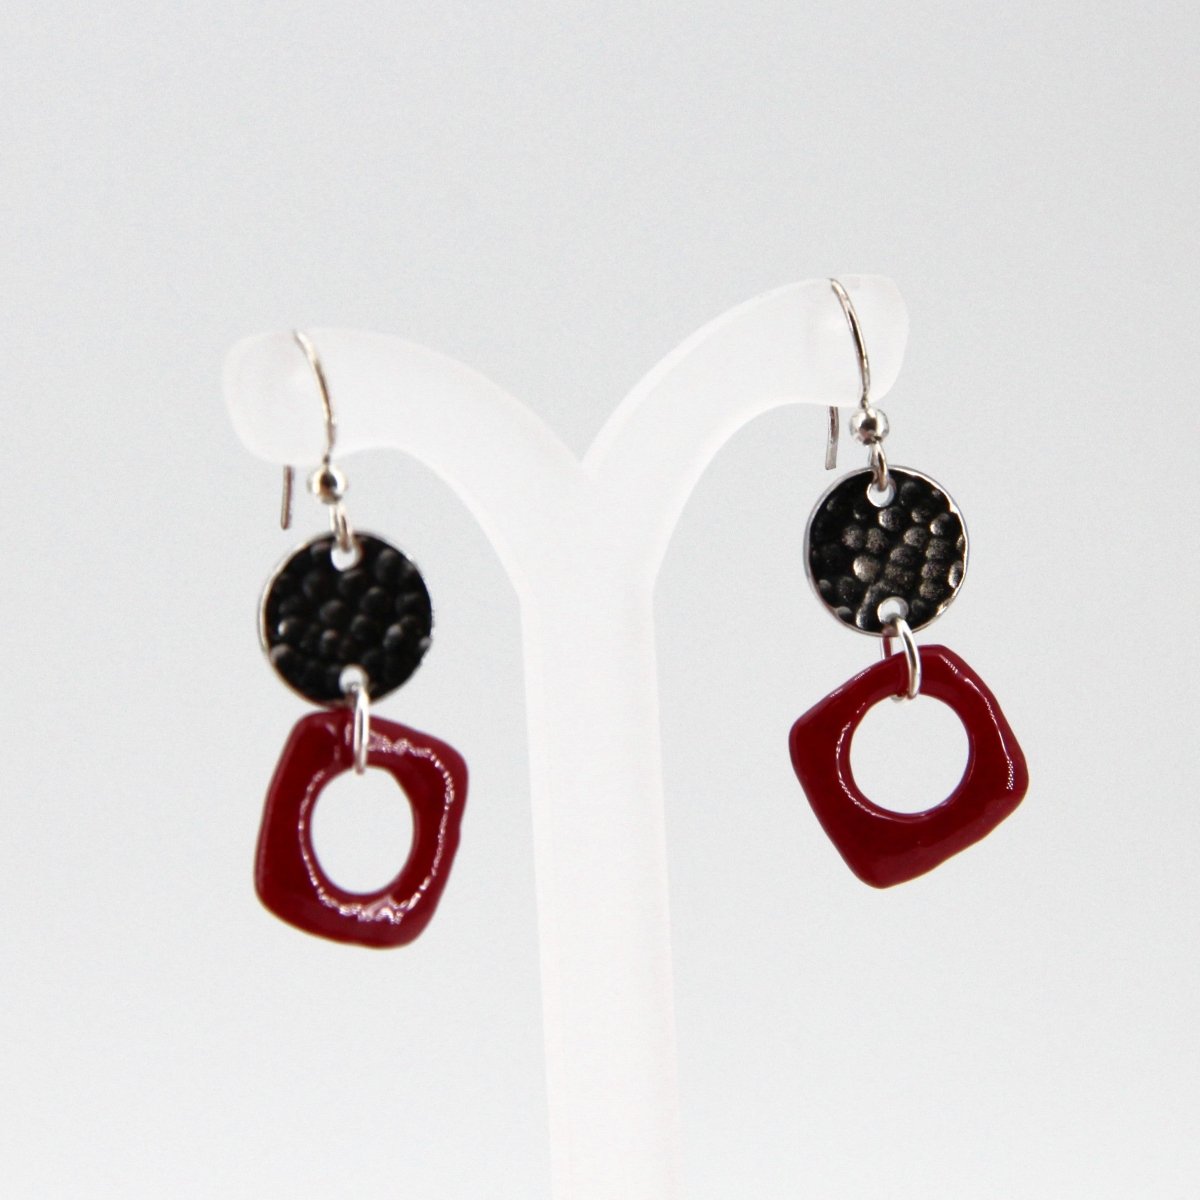 Red Glass Earrings with Round Silver Charm